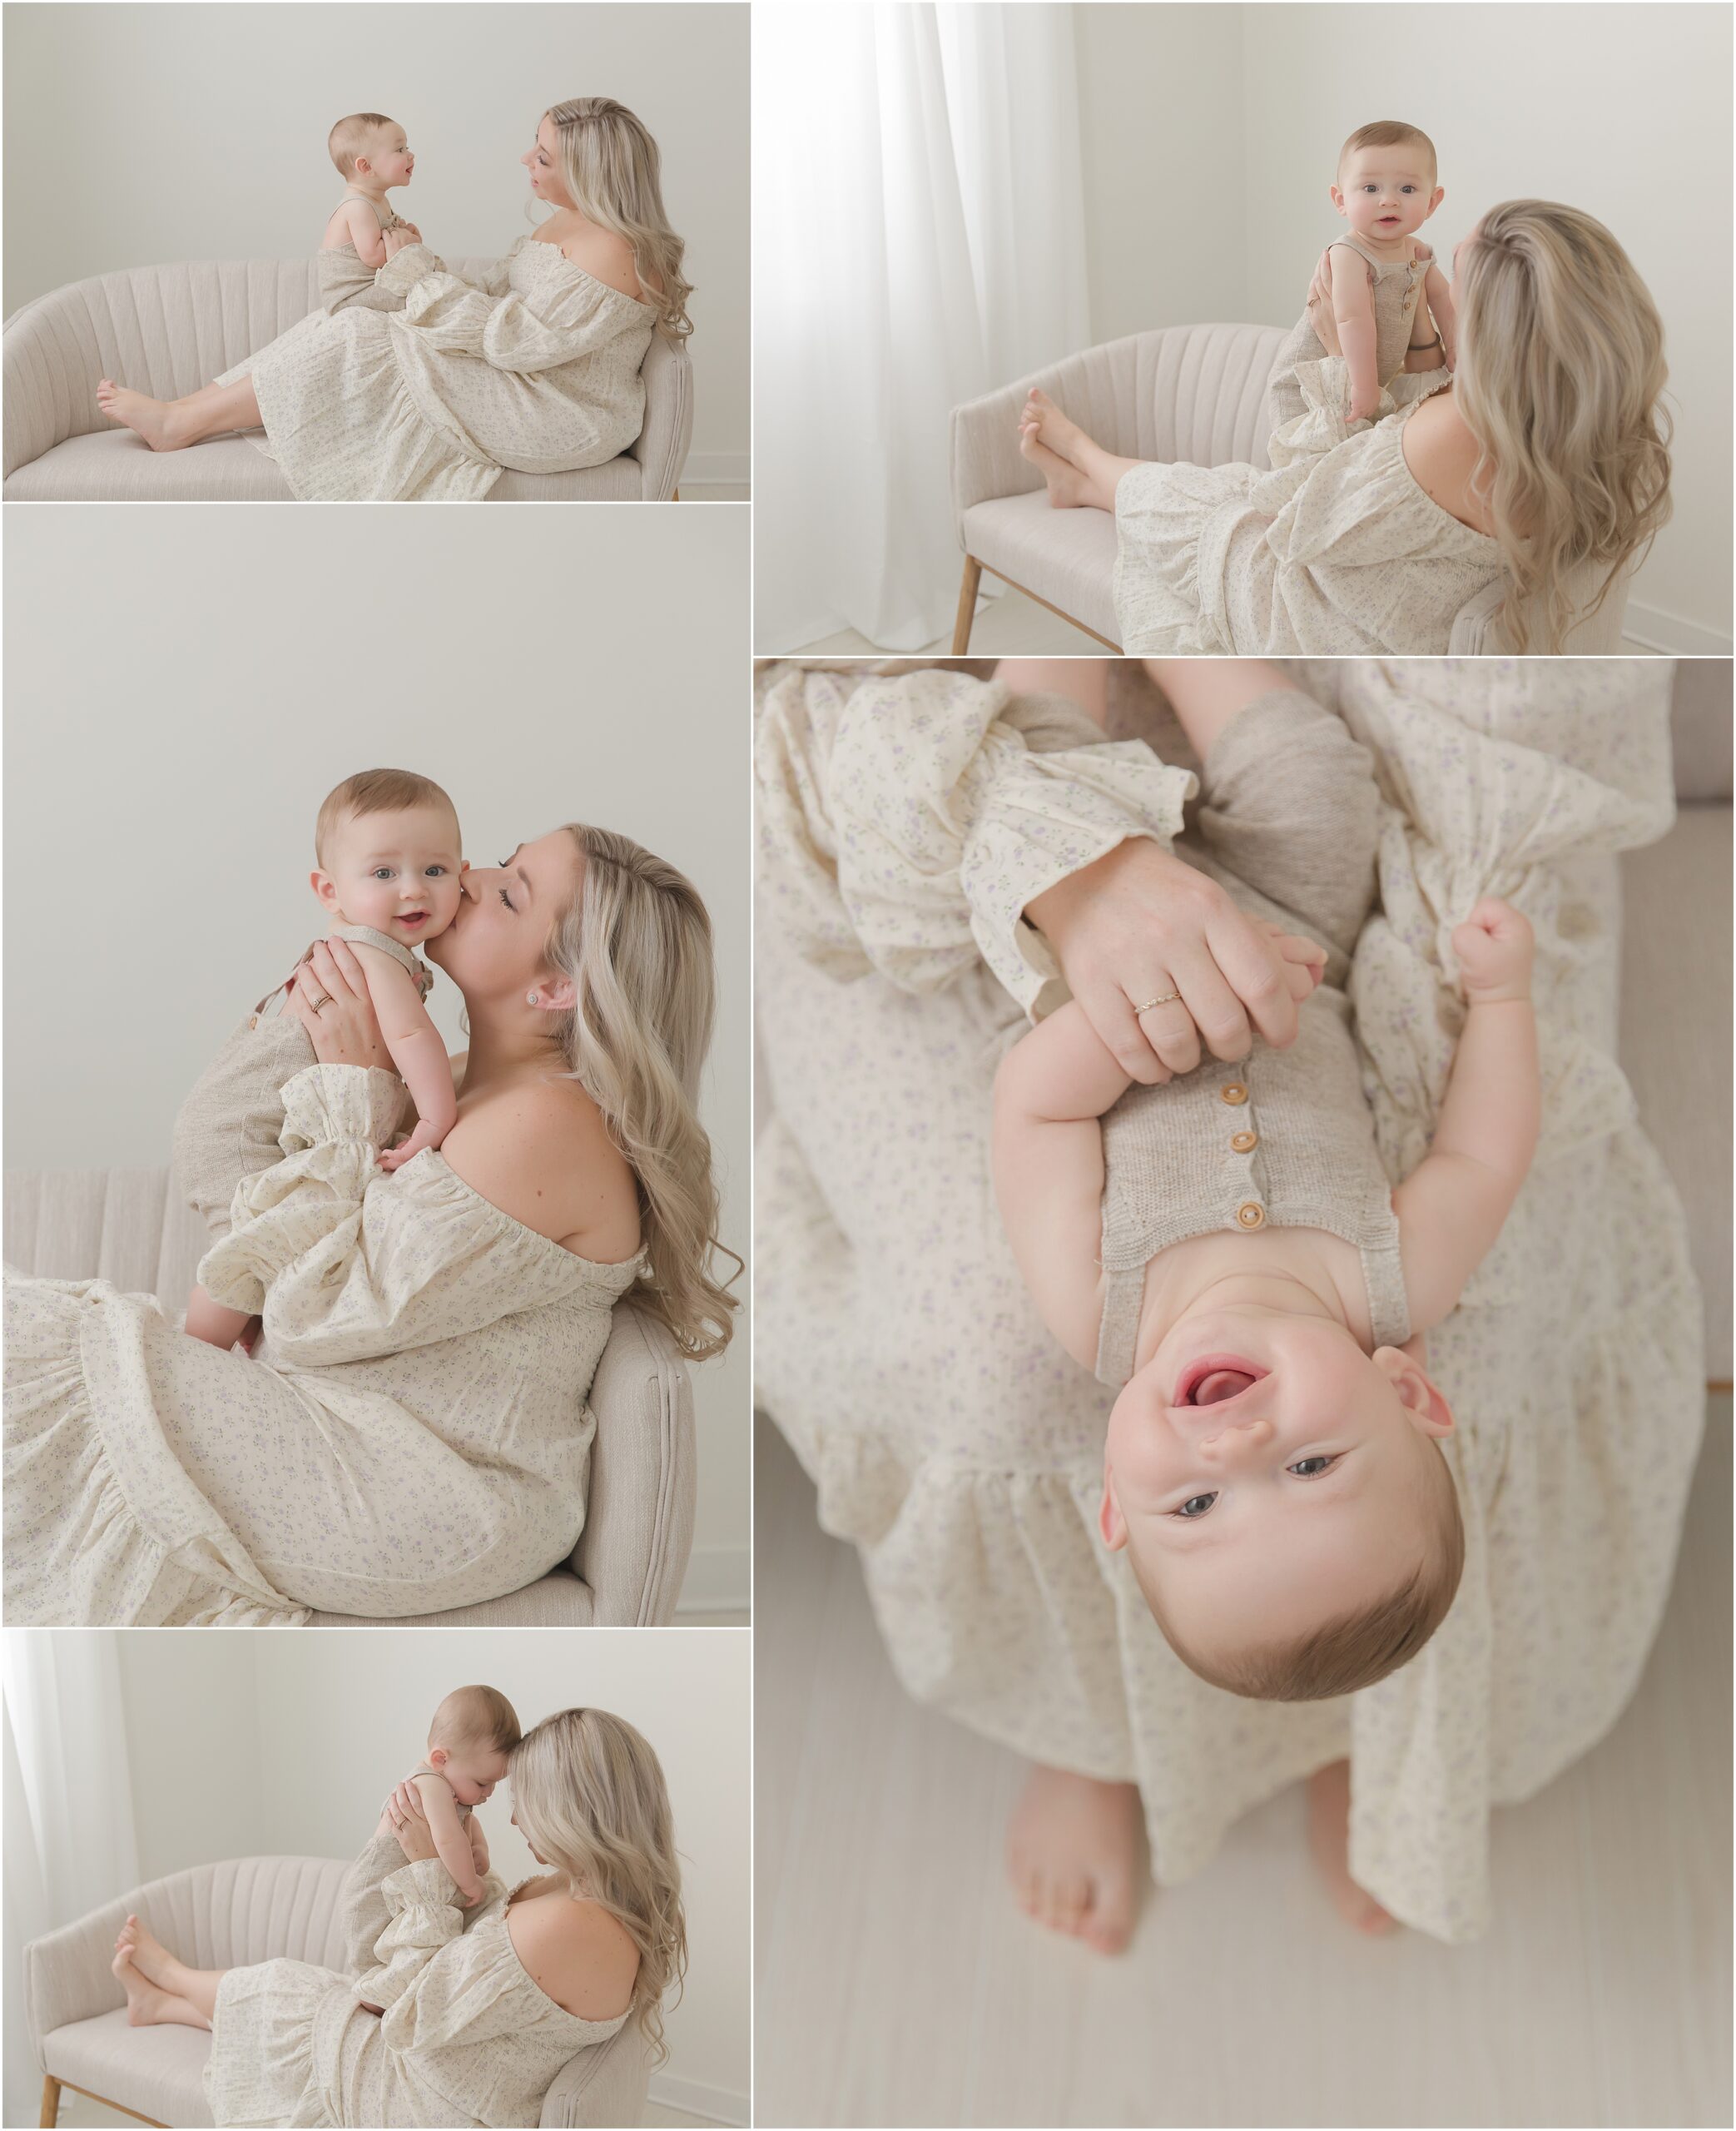 Blond mother and her baby snuggle together on a gray couch